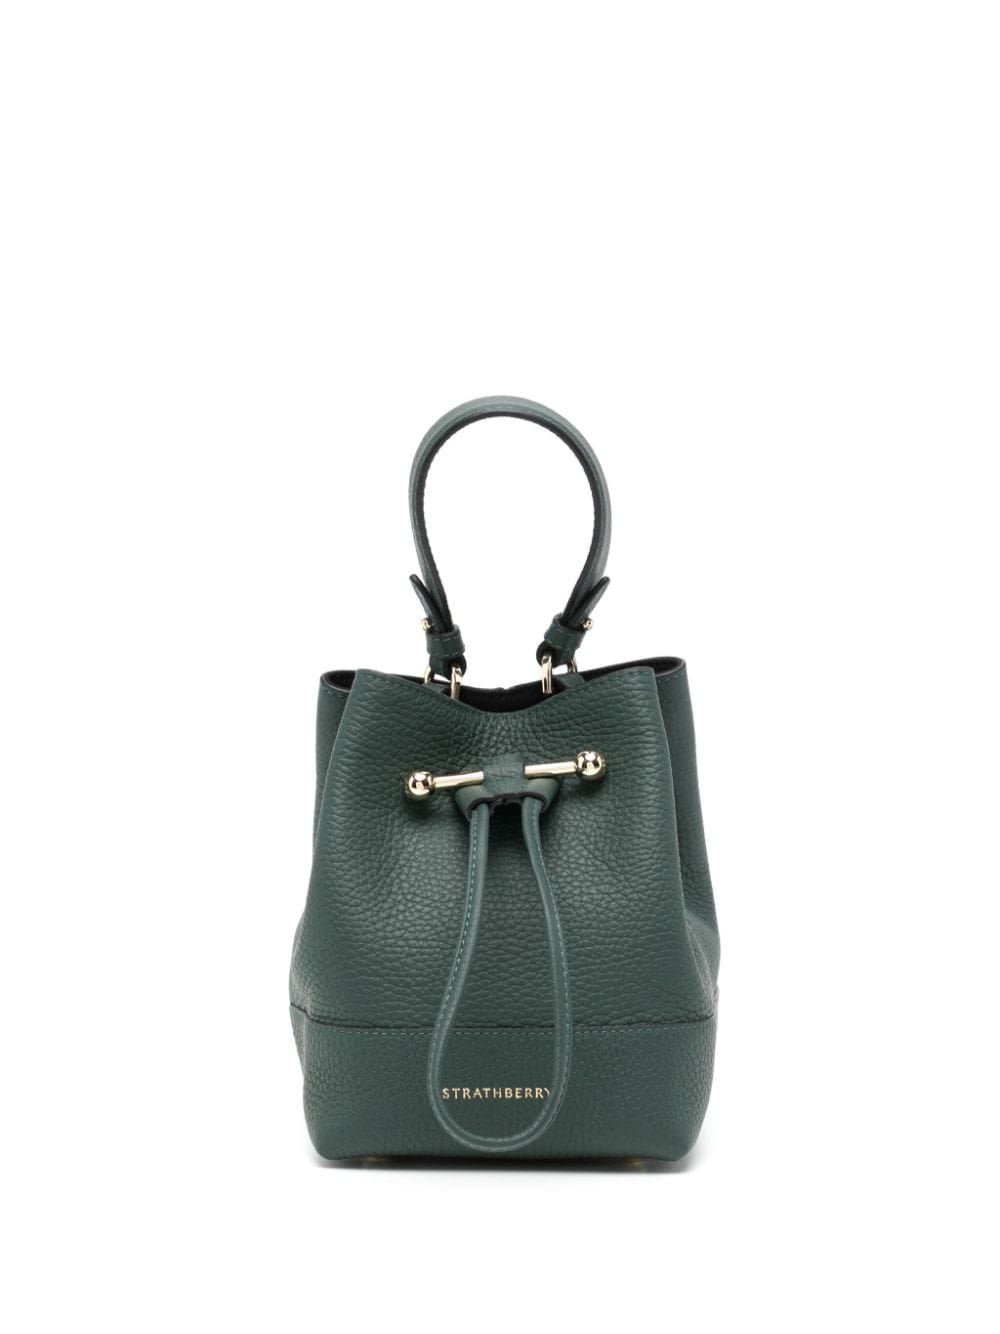 Strathberry Lana Osette Leather Bucket Bag In Green